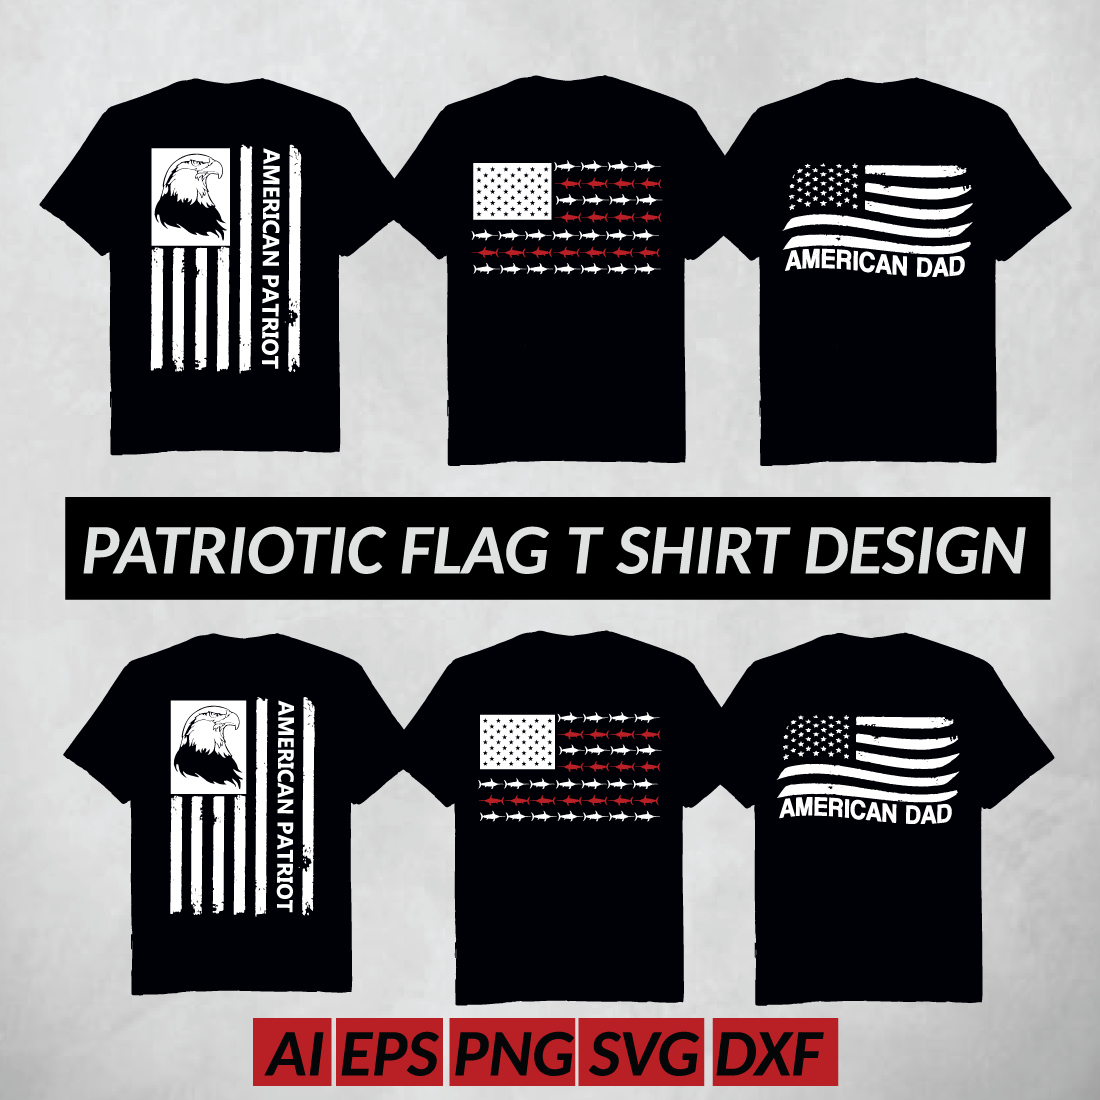 Show Your Love for America with this Patriotic T-Shirt Design cover image.